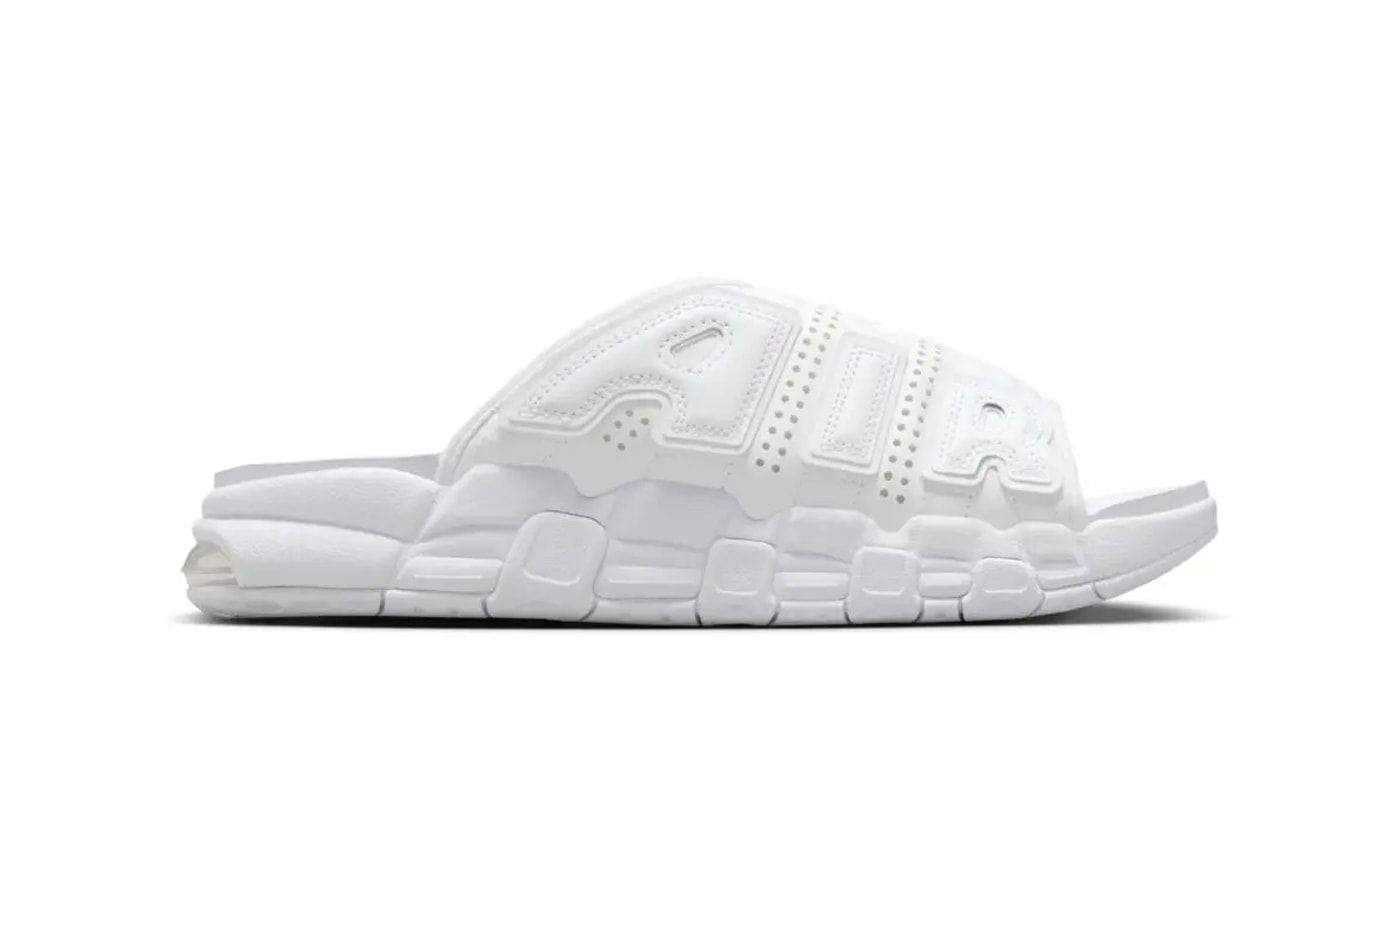 Official Look a the Nike Air More Uptempo Slide "Triple White" FD9883-101 sandals pool beach flip flop alternatives retro basketball